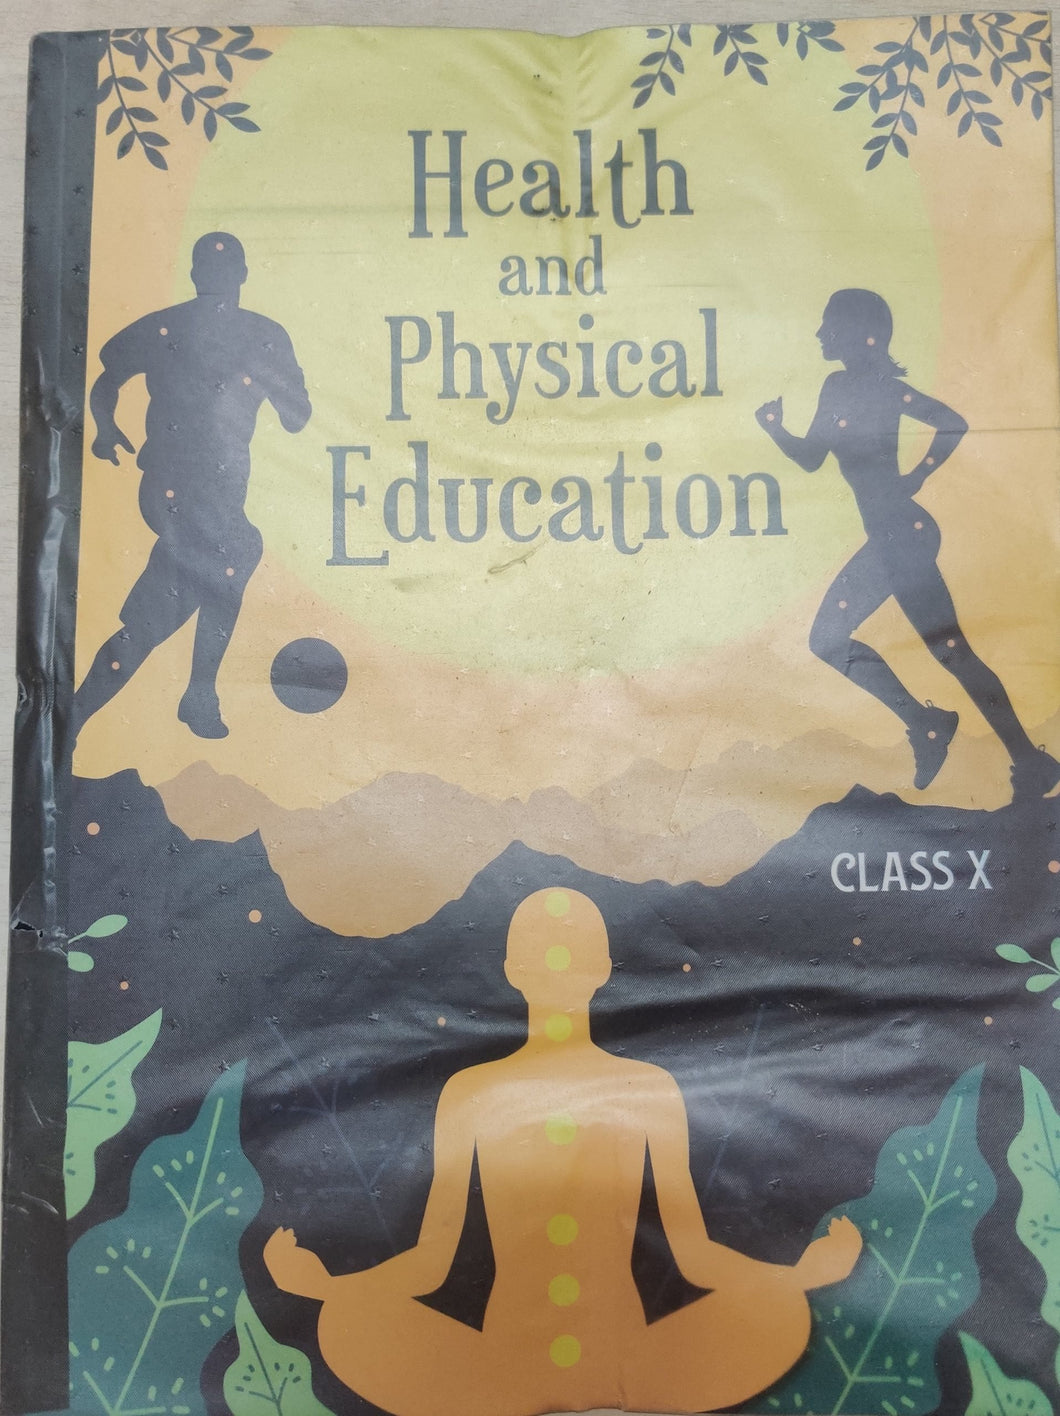 NCERT Health and Physical Education for Class 10